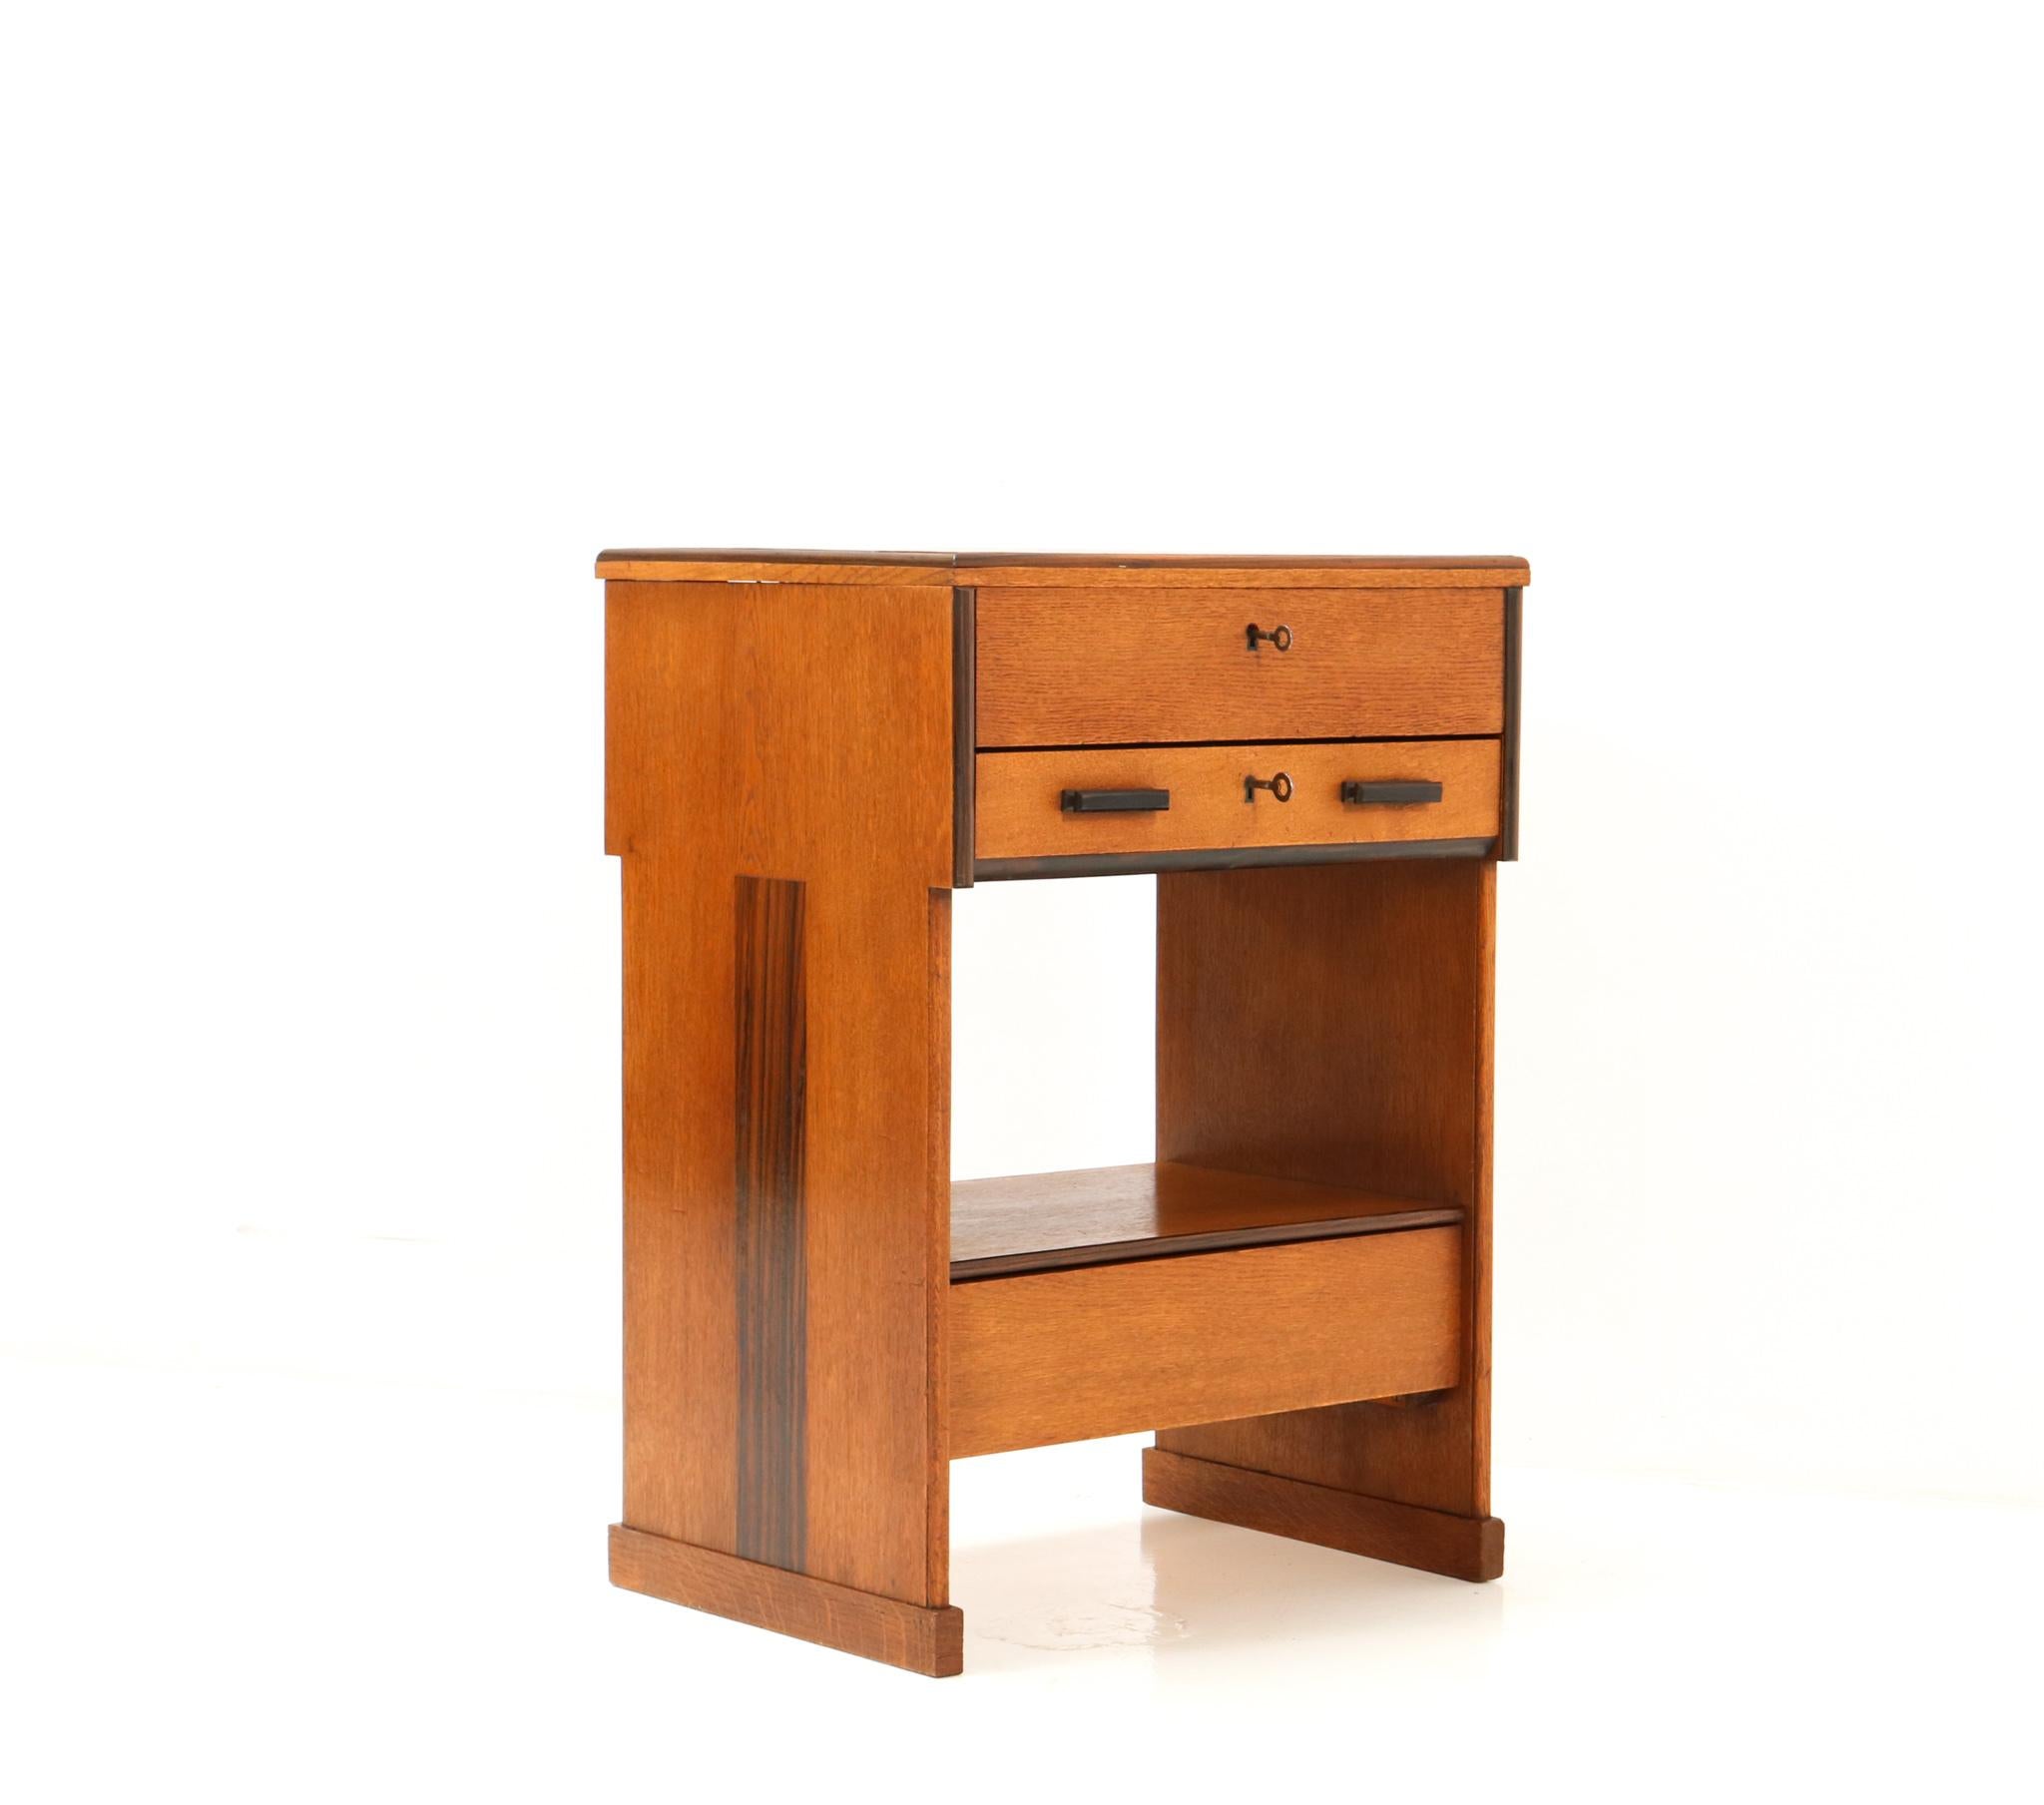 Oak Art Deco Modernist Sewing Table by P.E.L. Izeren for Genneper Molen, 1920s In Good Condition For Sale In Amsterdam, NL